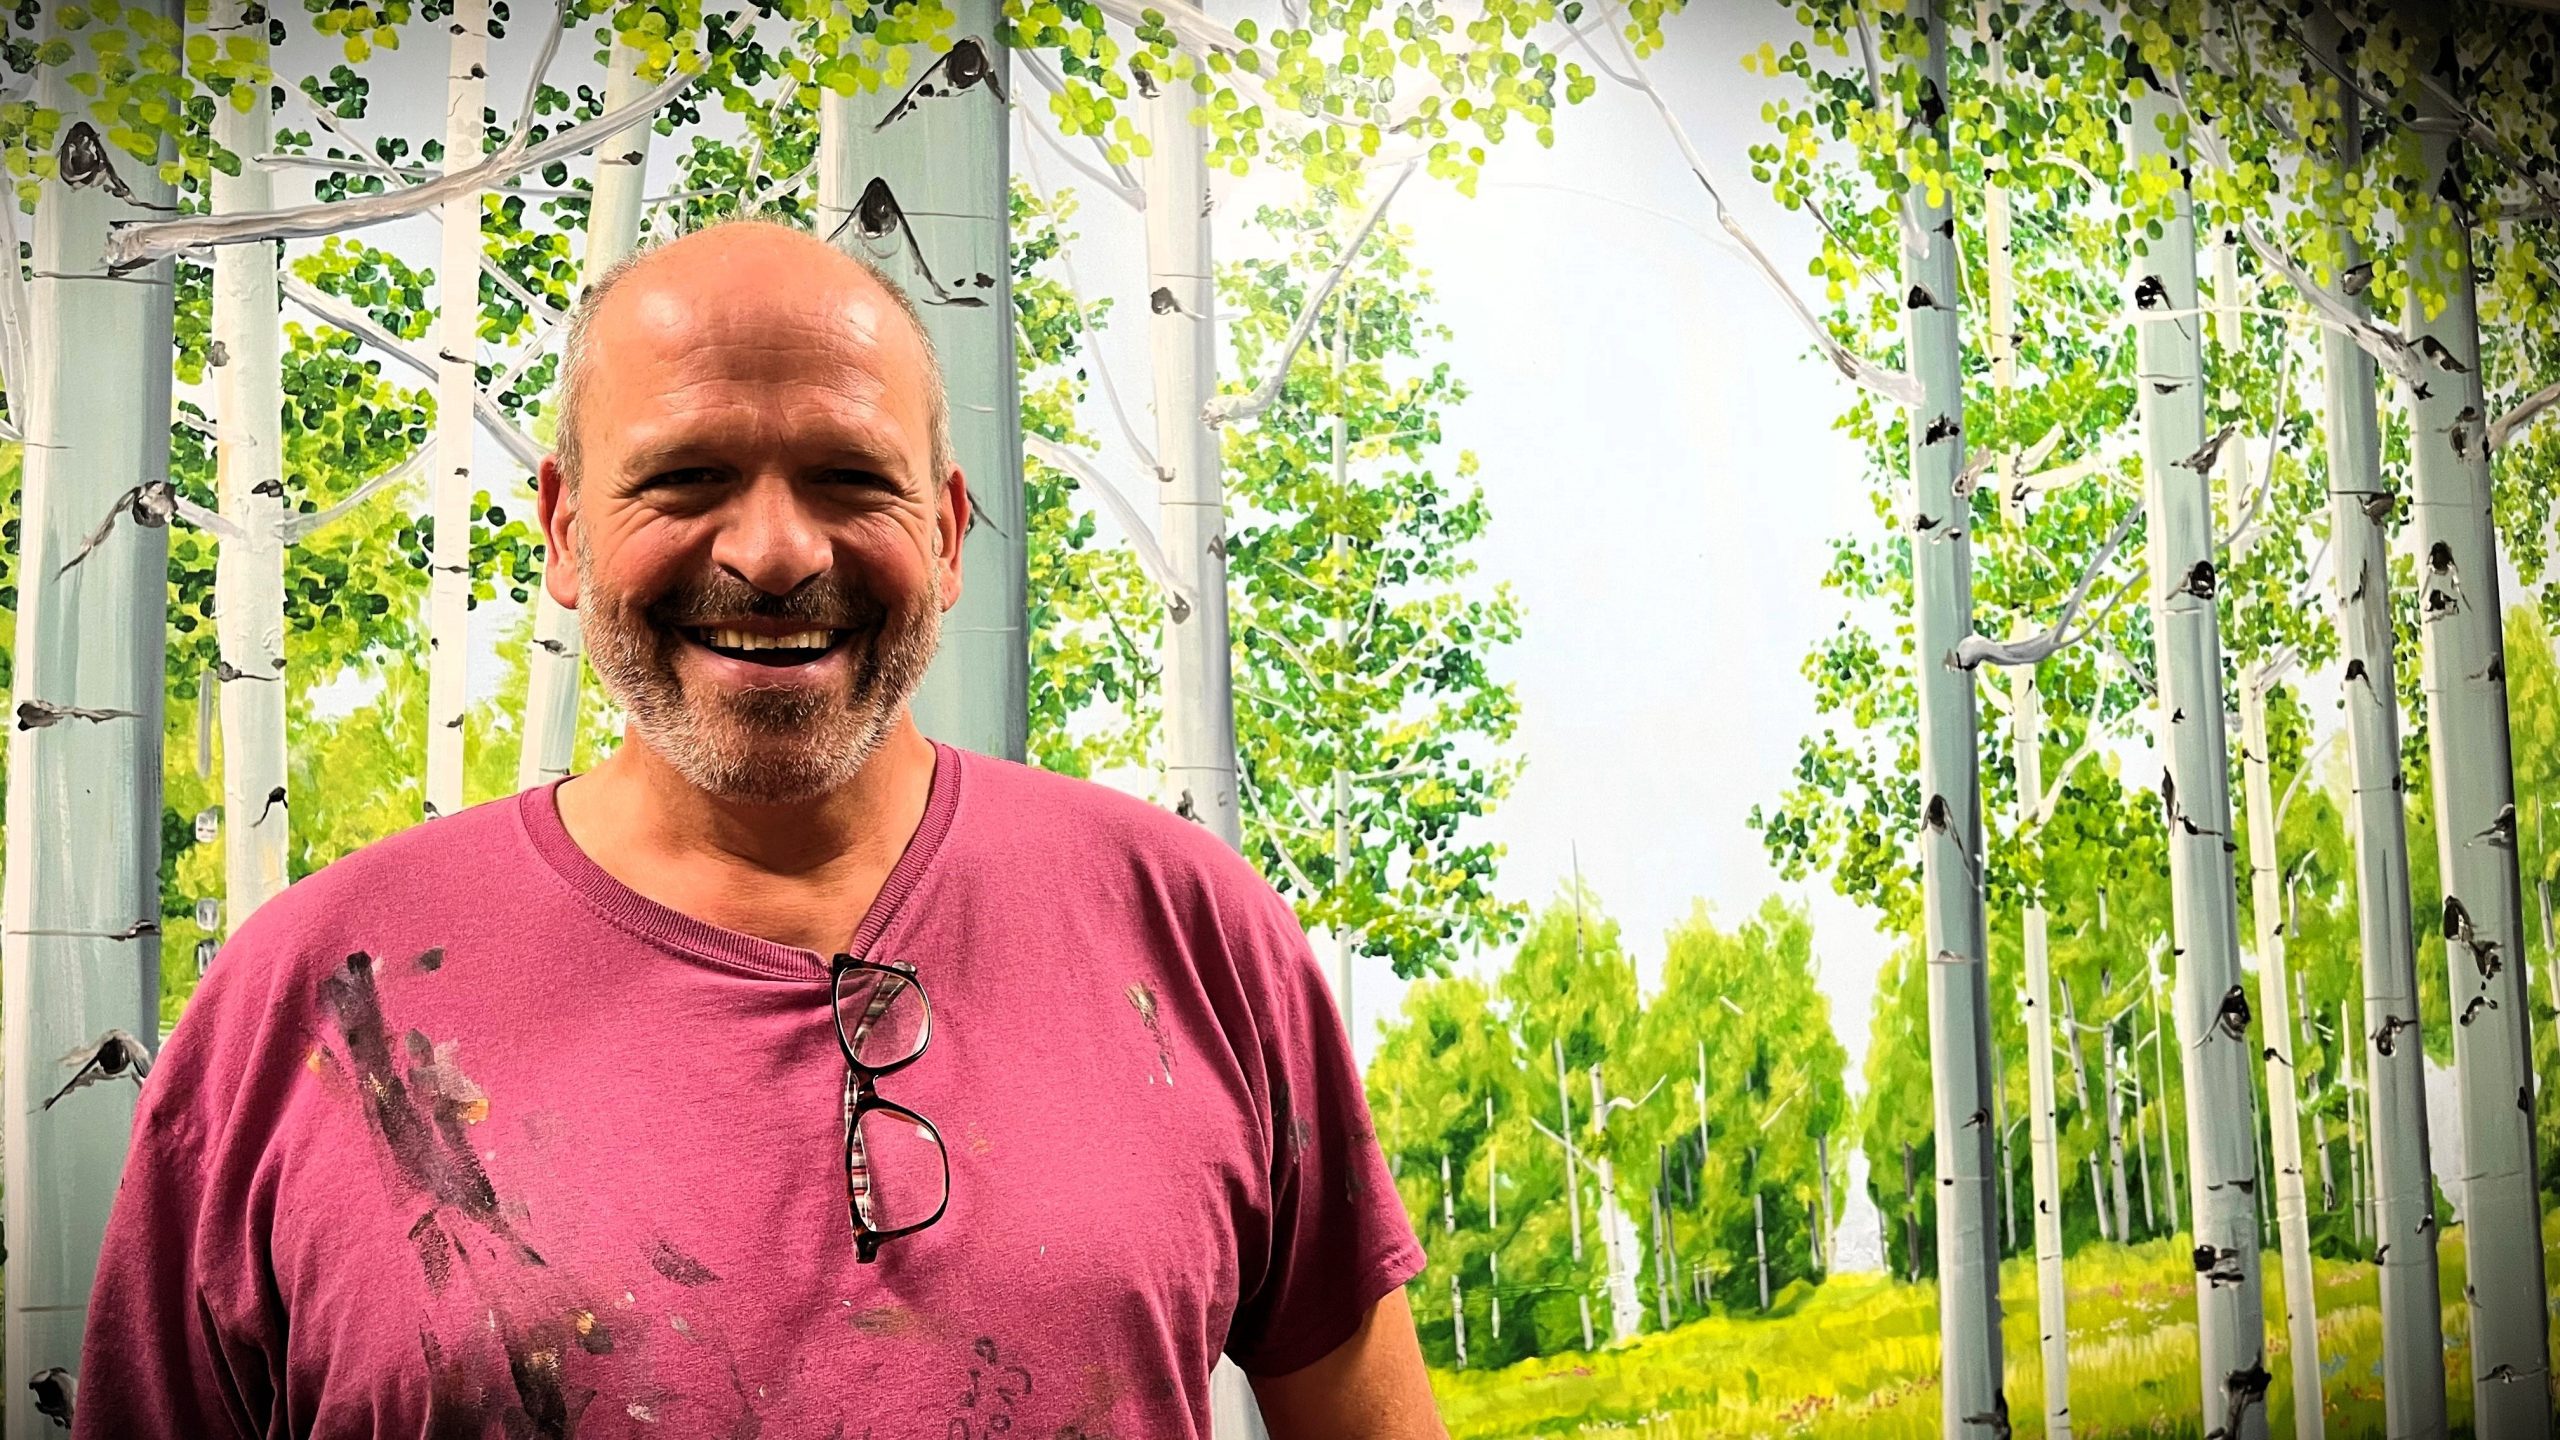 A man with a bald head and beard smiles while wearing a paint-stained pink shirt, standing in front of a detailed mural depicting a forest scene with birch trees and greenery.